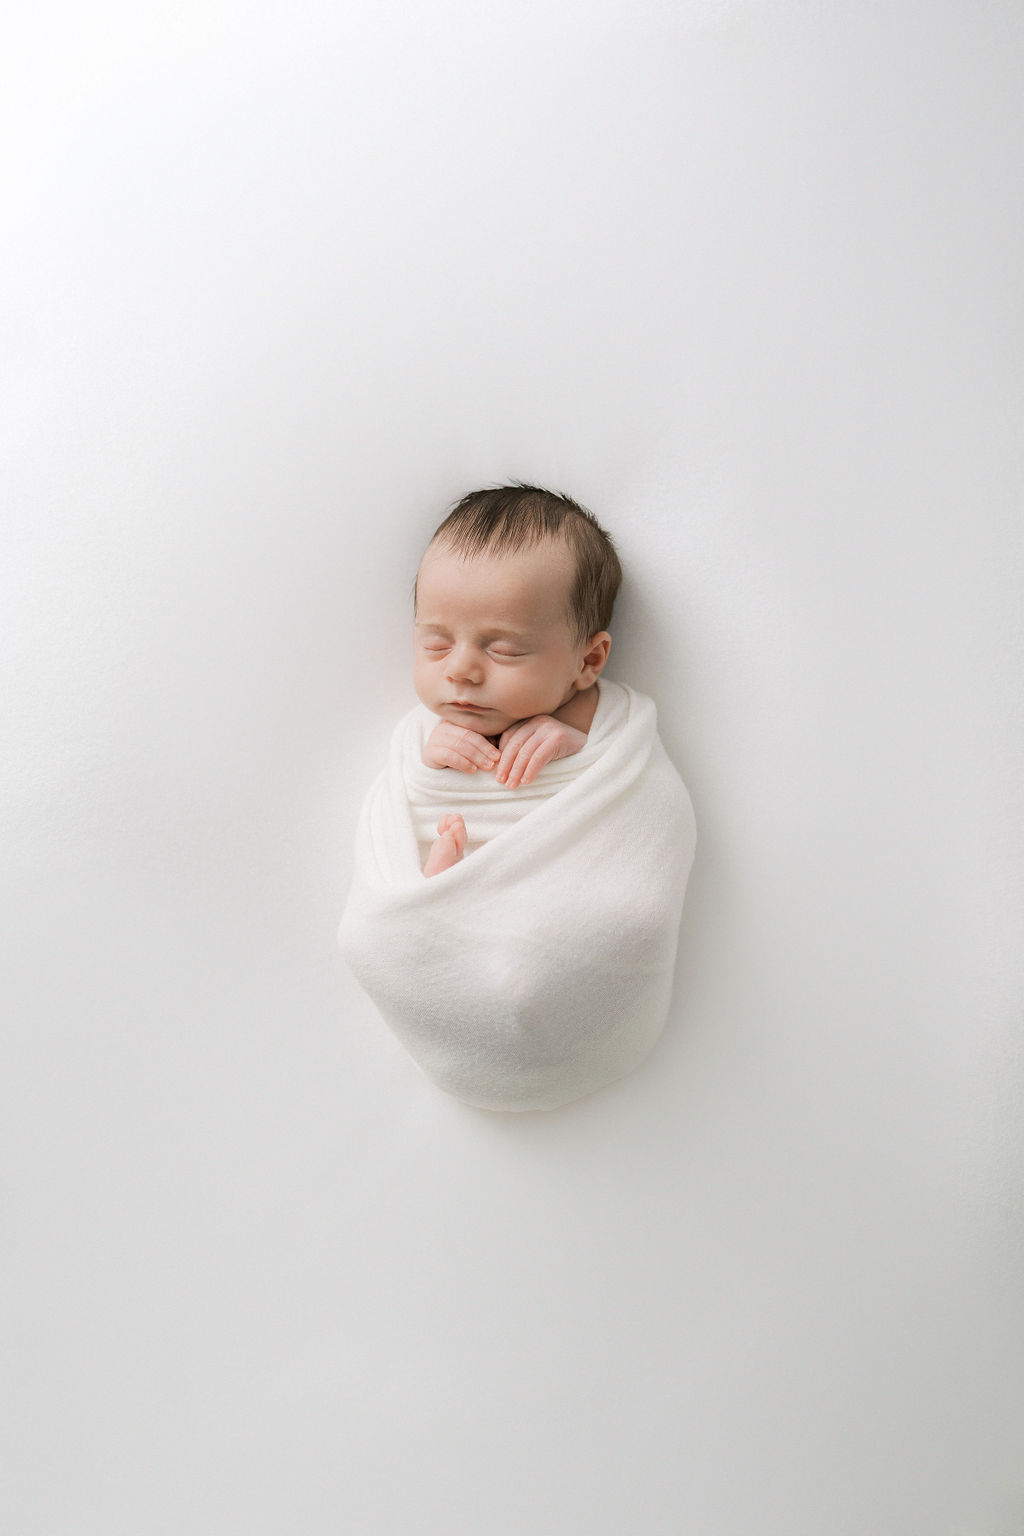 A newborn baby sleeps in a white swaddle with hands sticking out on a white bed